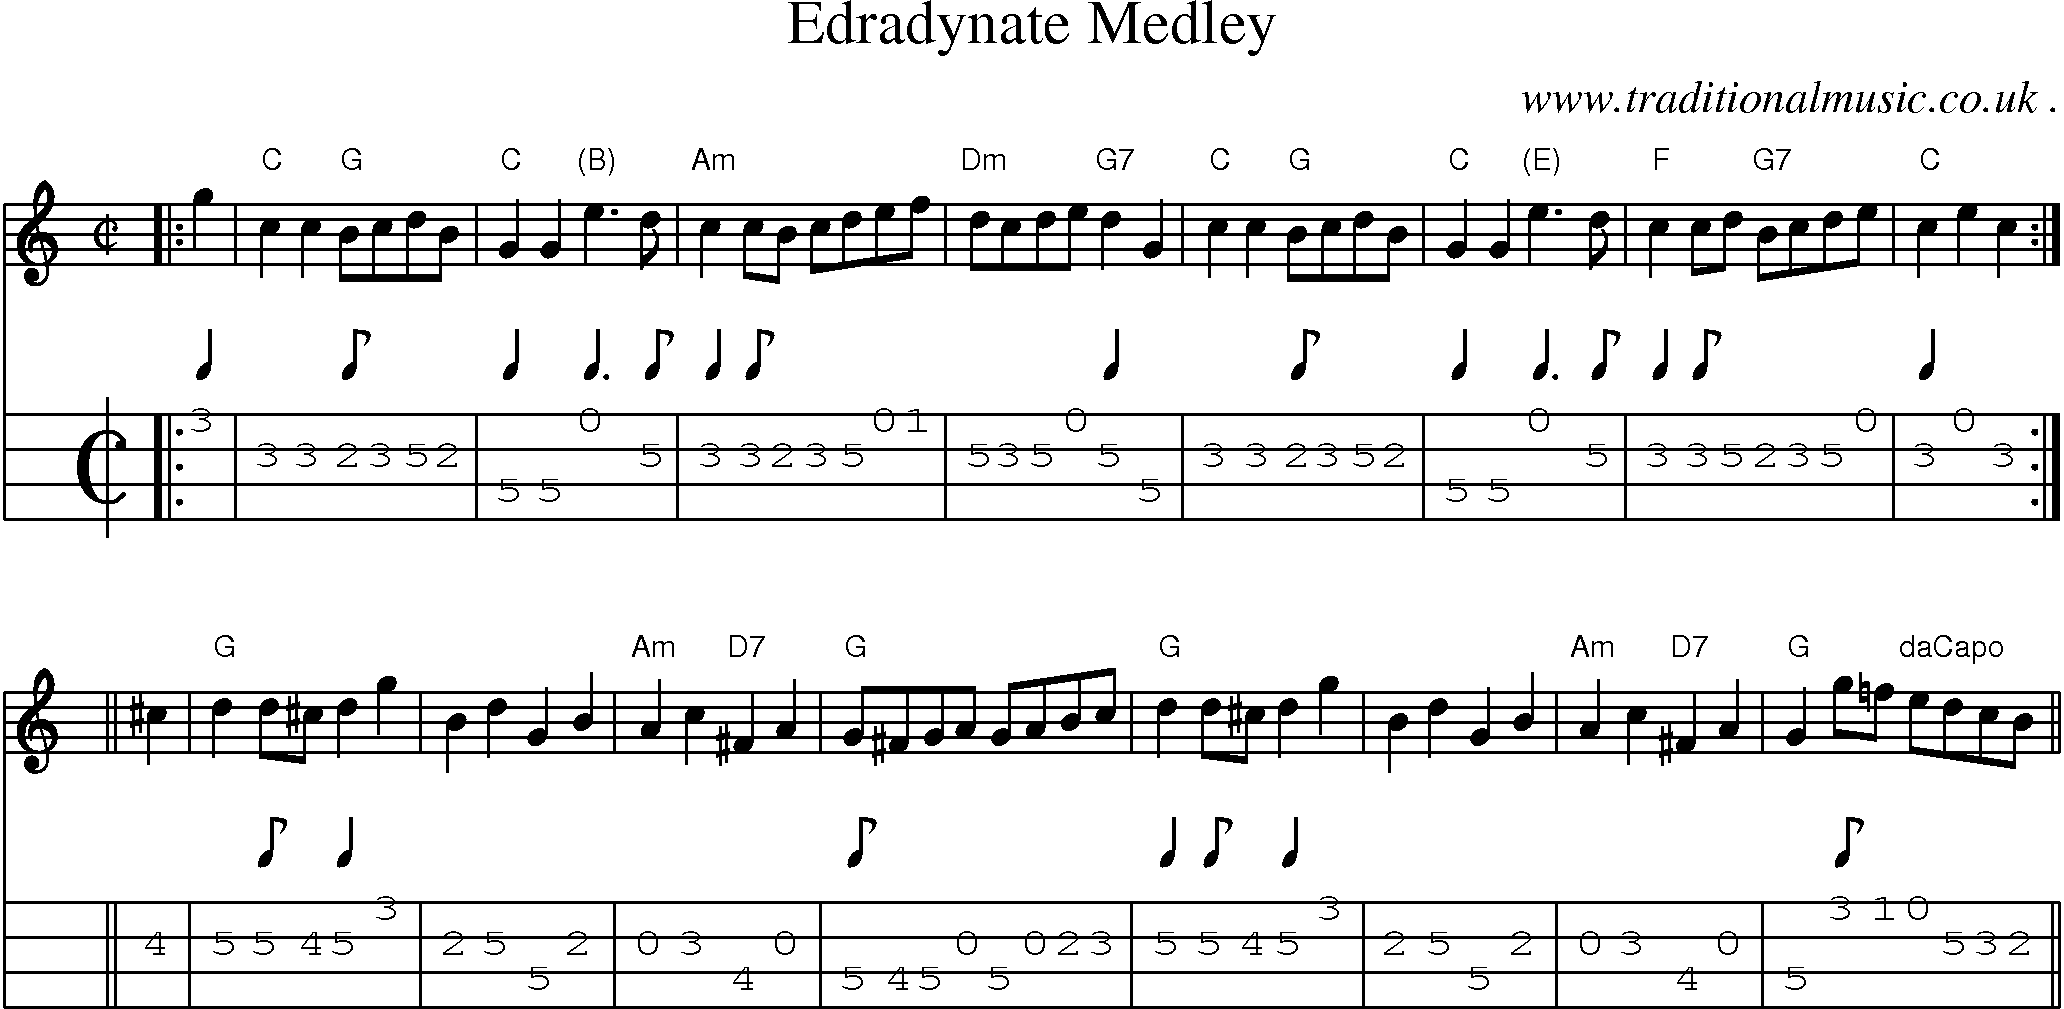 Sheet-music  score, Chords and Mandolin Tabs for Edradynate Medley